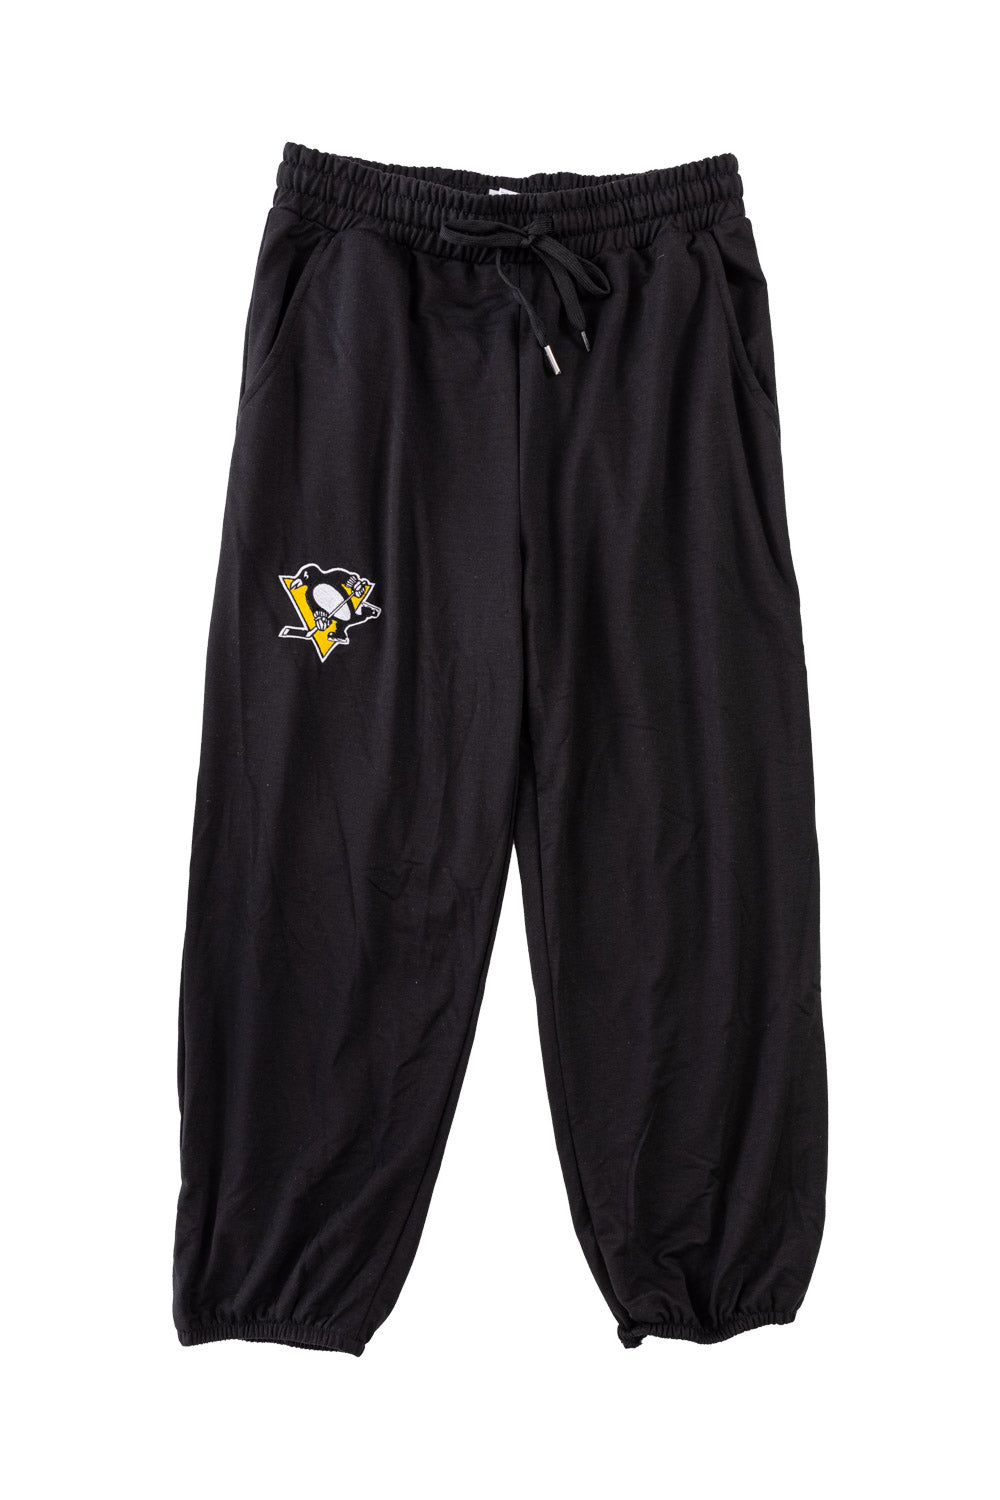 Pittsburgh Penguins Ladies Cropped Jogger Style Track Pants